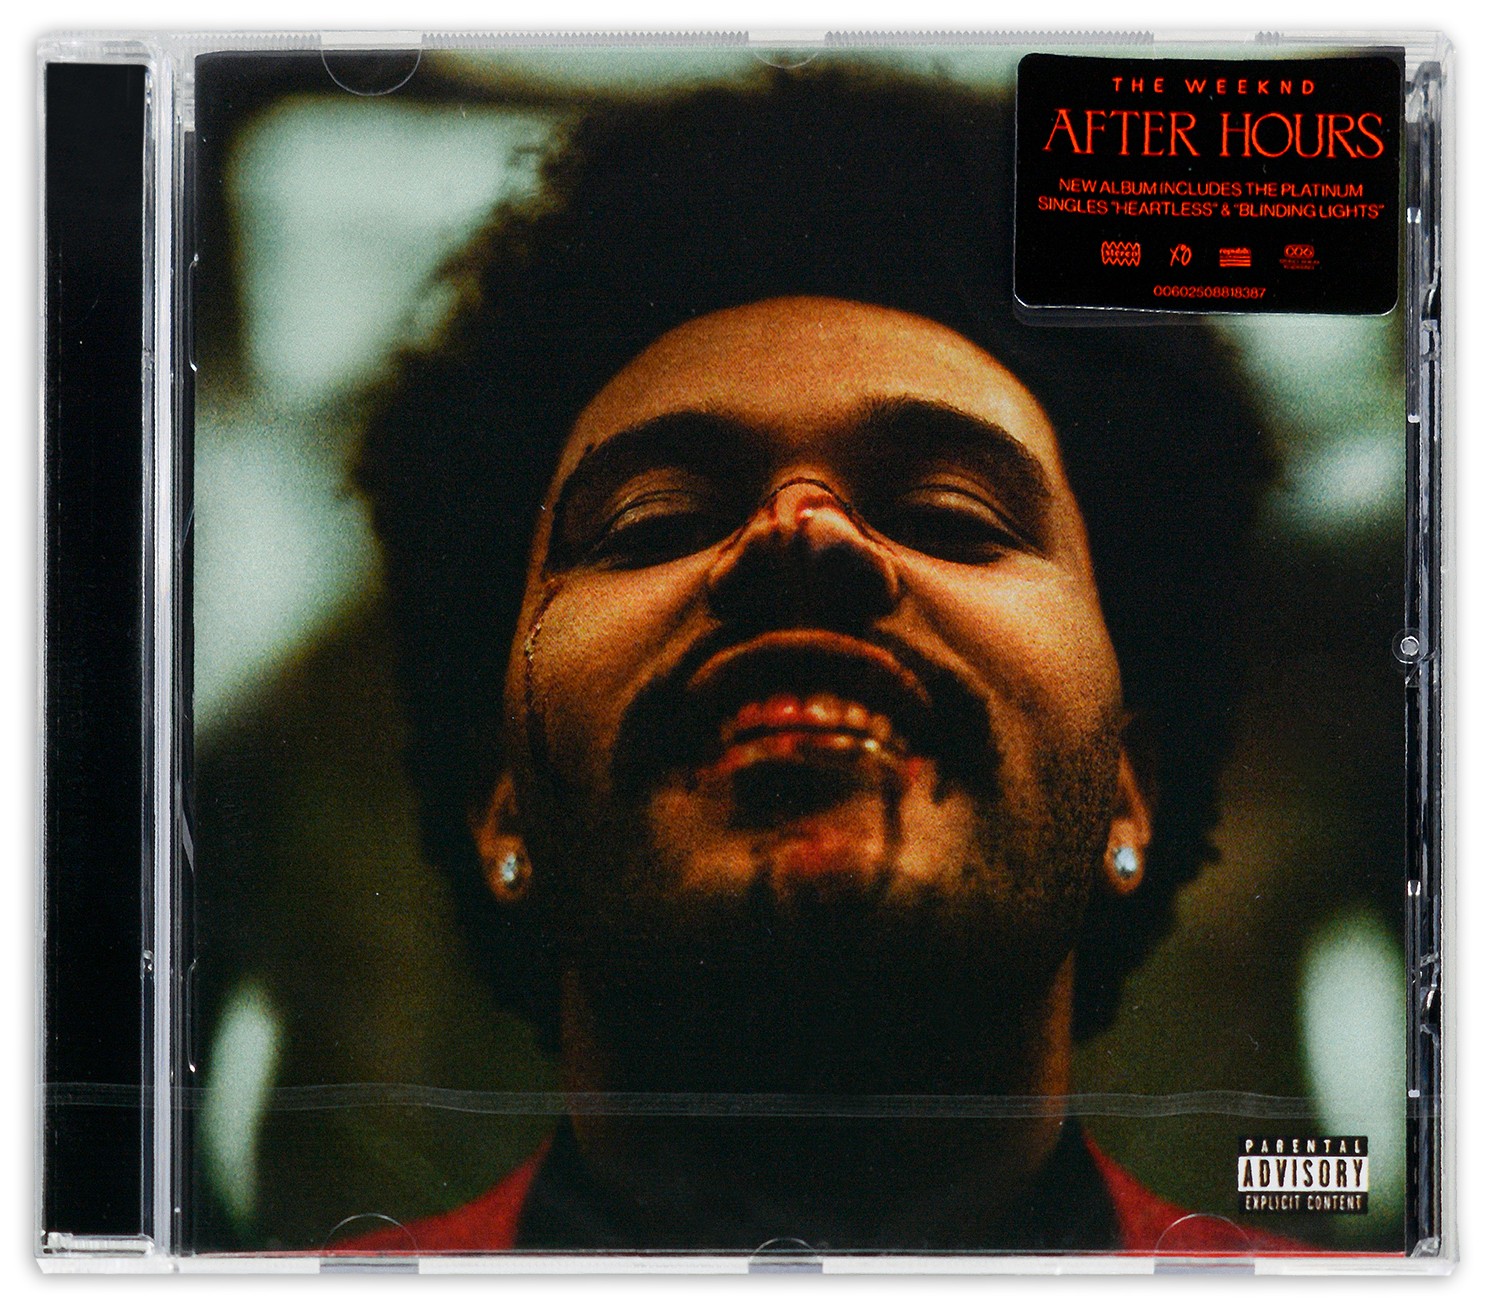 The Weeknd - After Hours - CD 